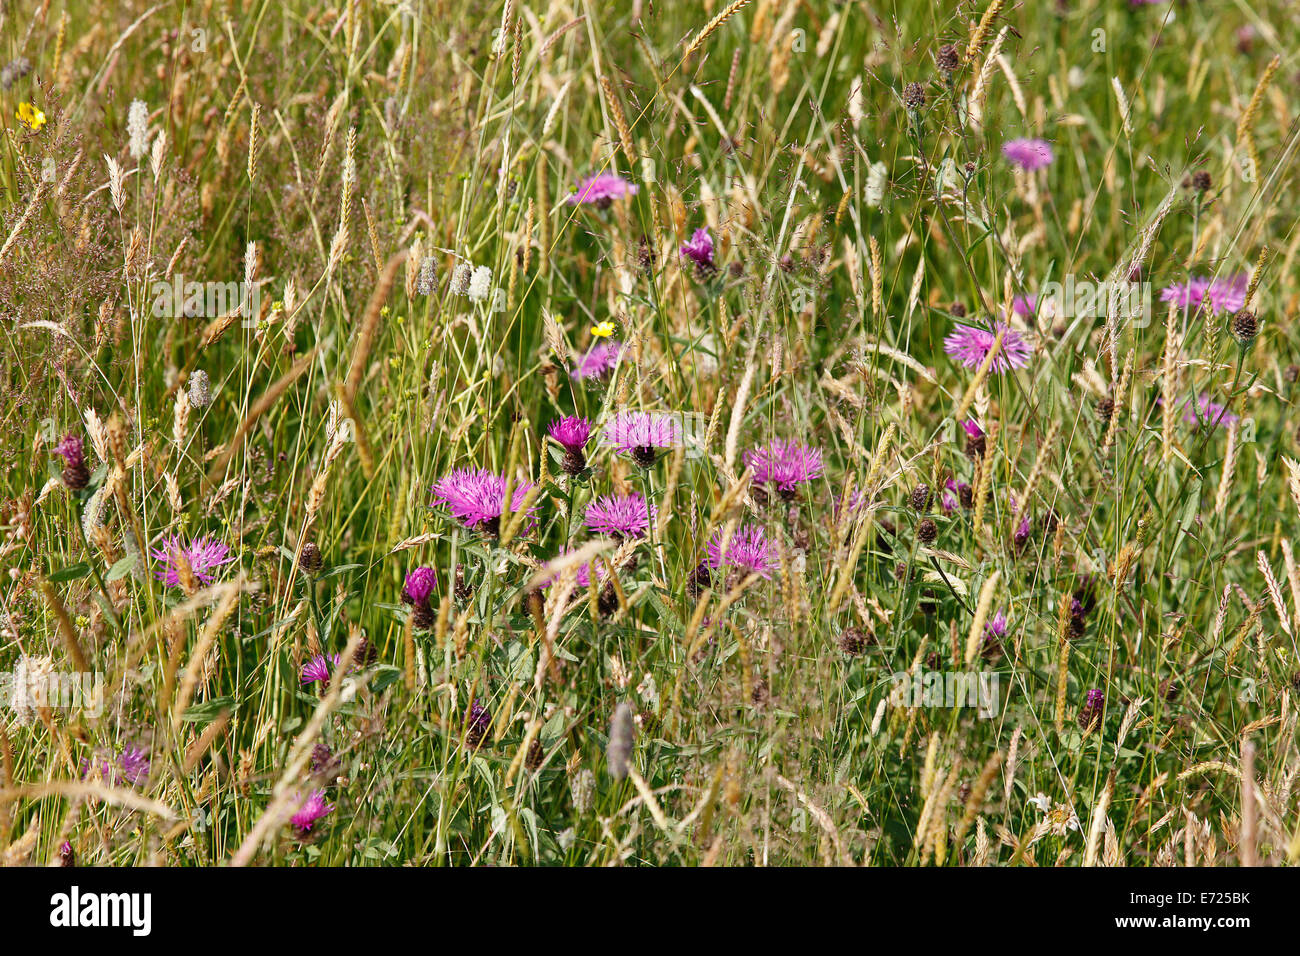 England, East Sussex, Rotherfield, Wild flower meadow of grasses and clovers. Stock Photo